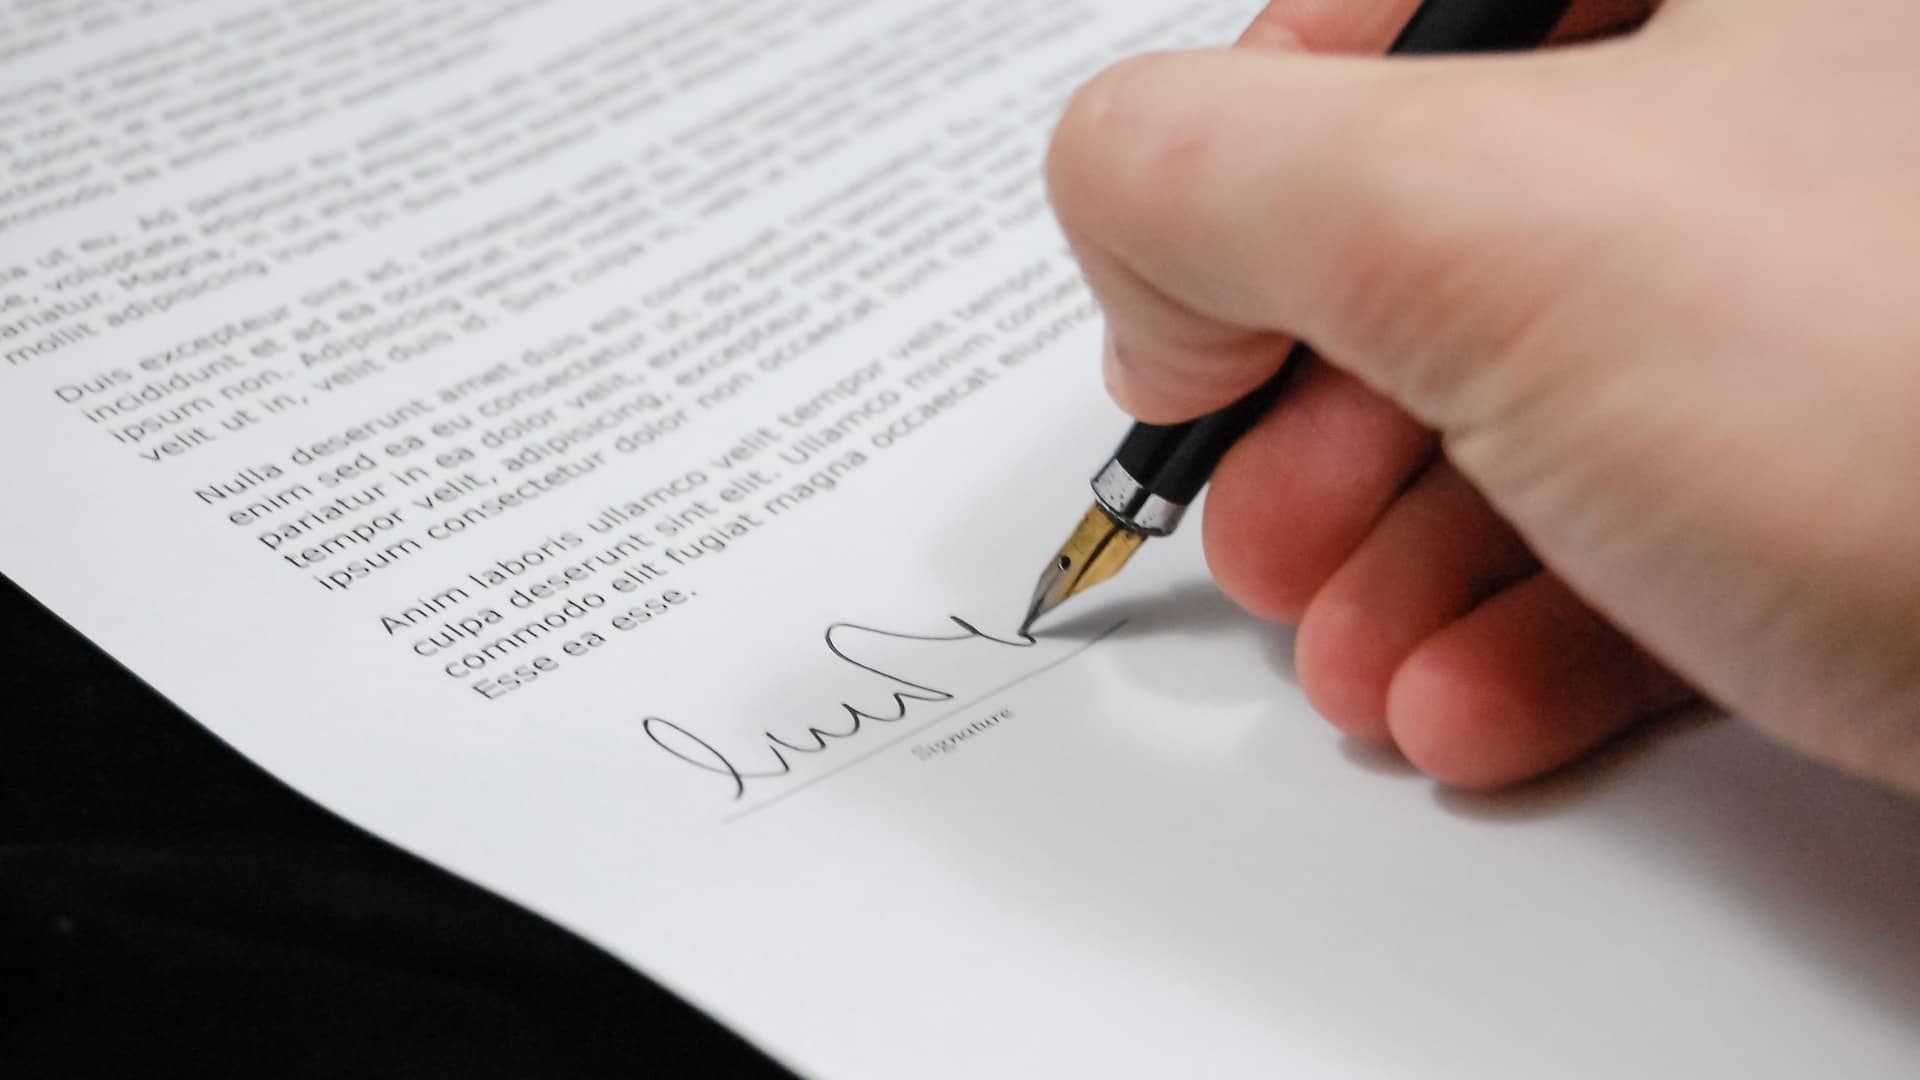 Hand signing a document with a fountain pen on a white surface